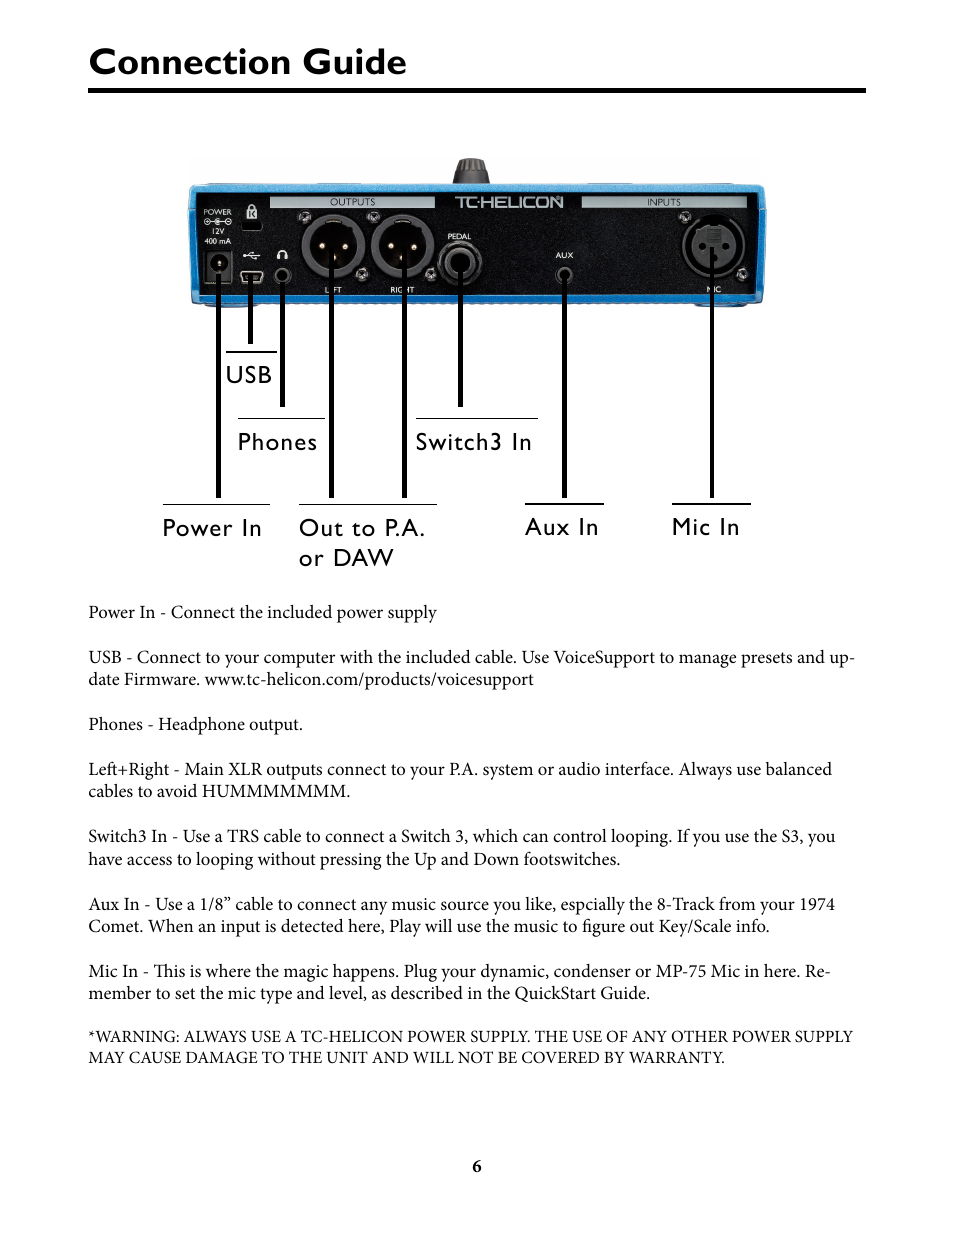 Connection Guide Tc Helicon Voicelive Play Details Manual User Manual Page 6 32 Original Mode